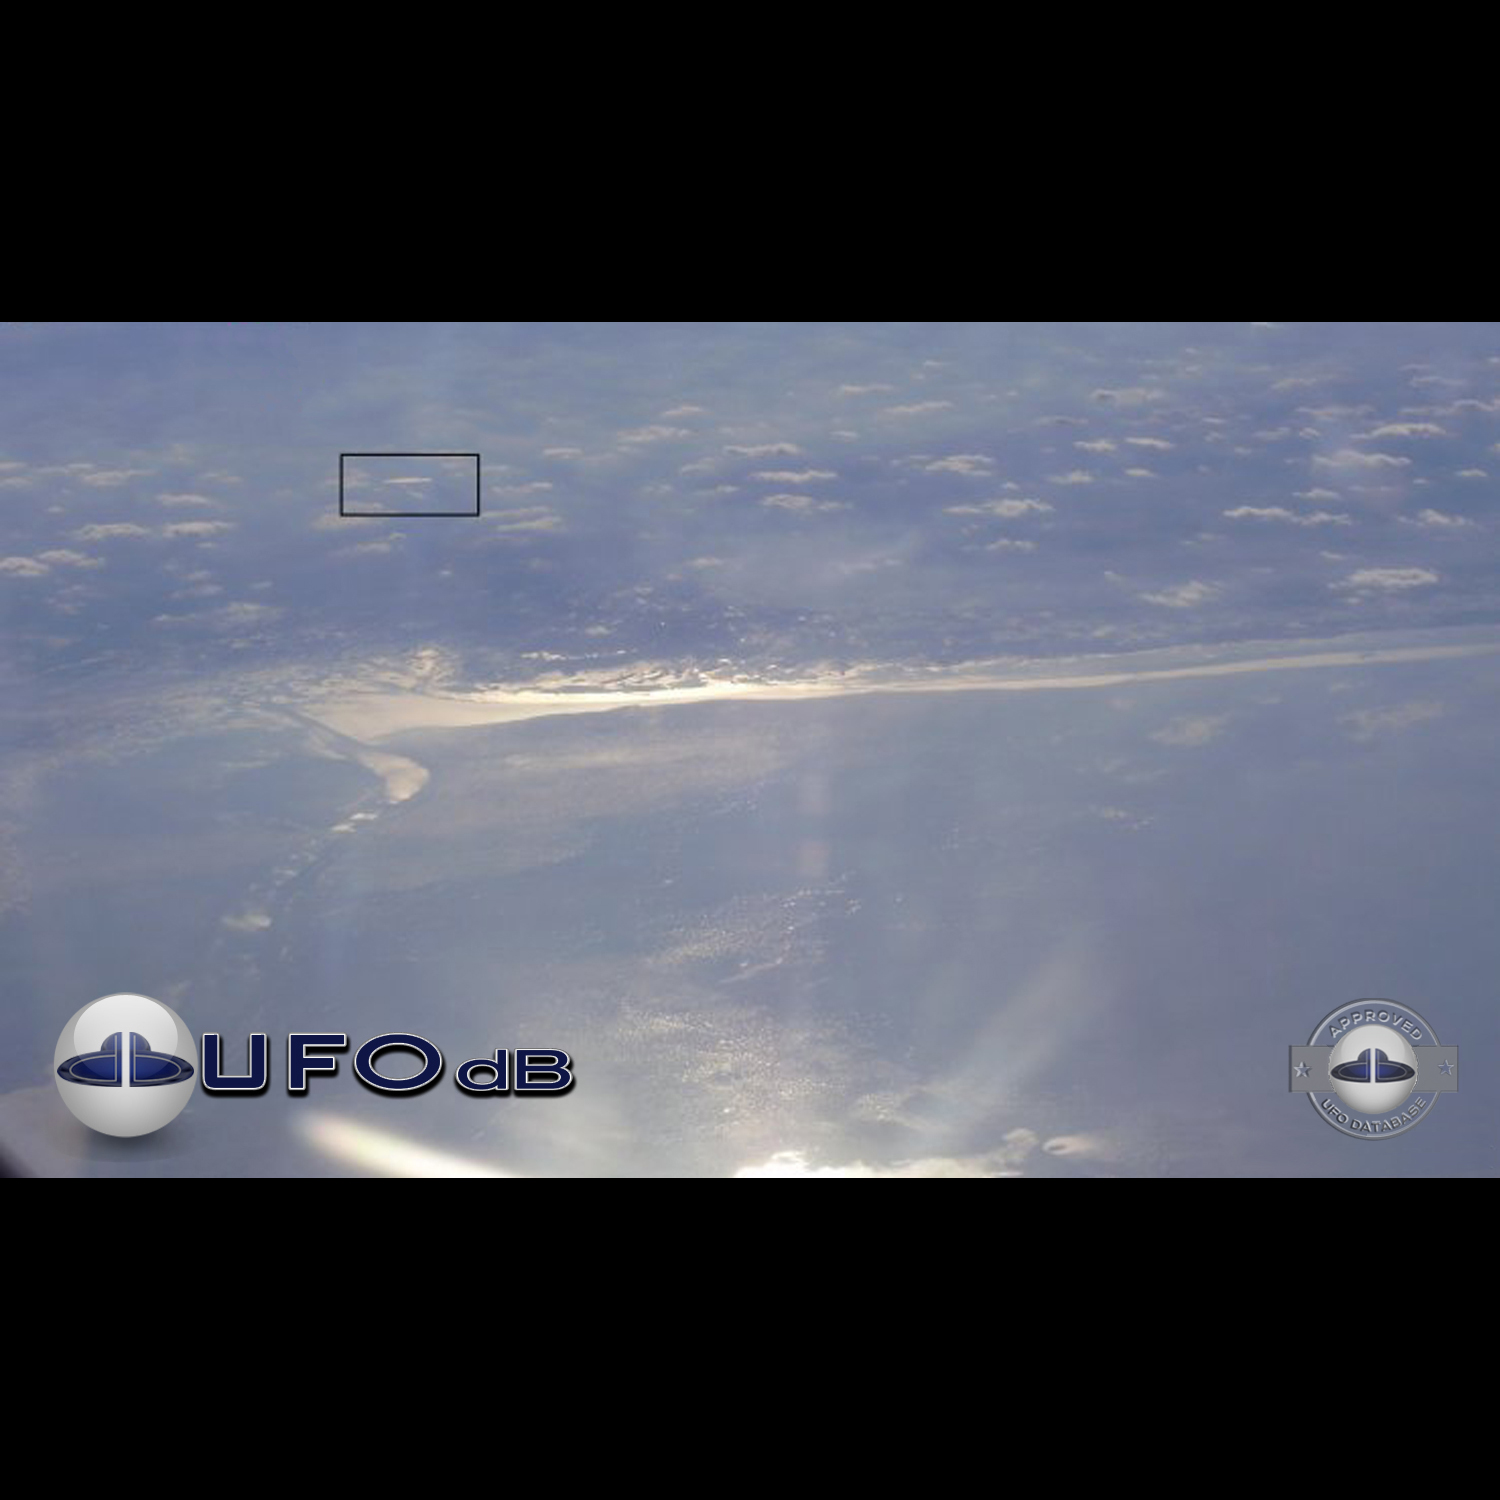 Black Sea UFO picture shot from Airplane | Turkey | January 10 2010 UFO Picture #207-1